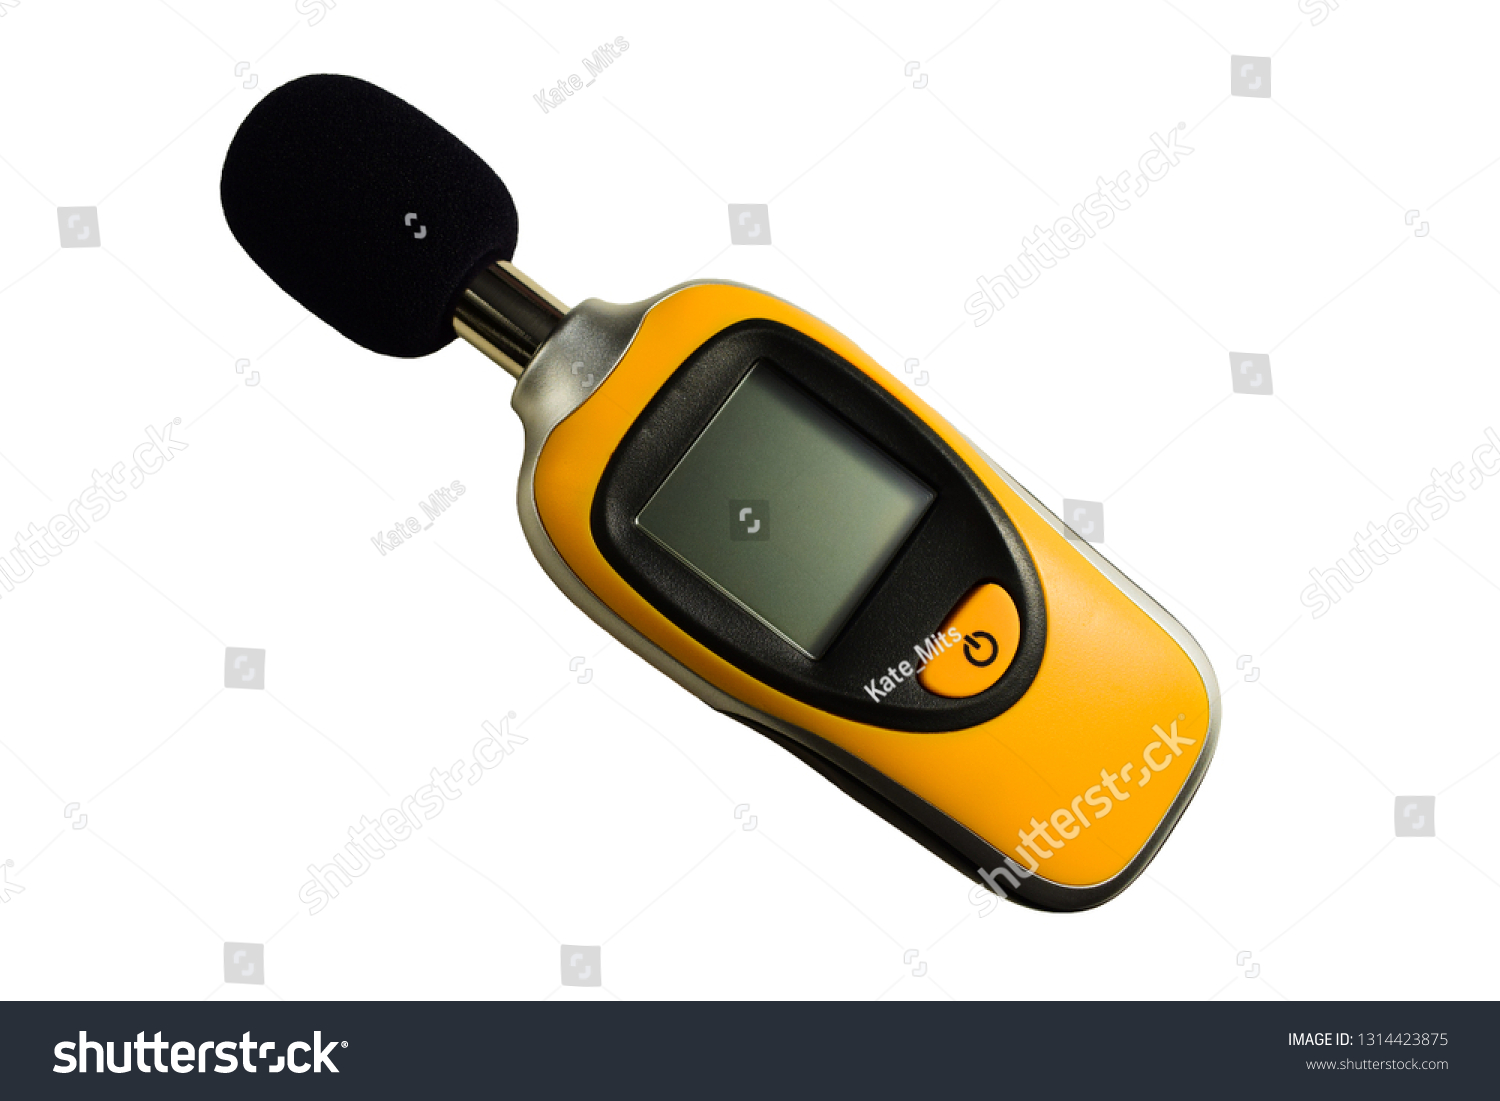 Isolated yellow sound meter on white background. Commonly used in noise pollution studies, used for acoustic (sound that travels through air) measurements. #1314423875